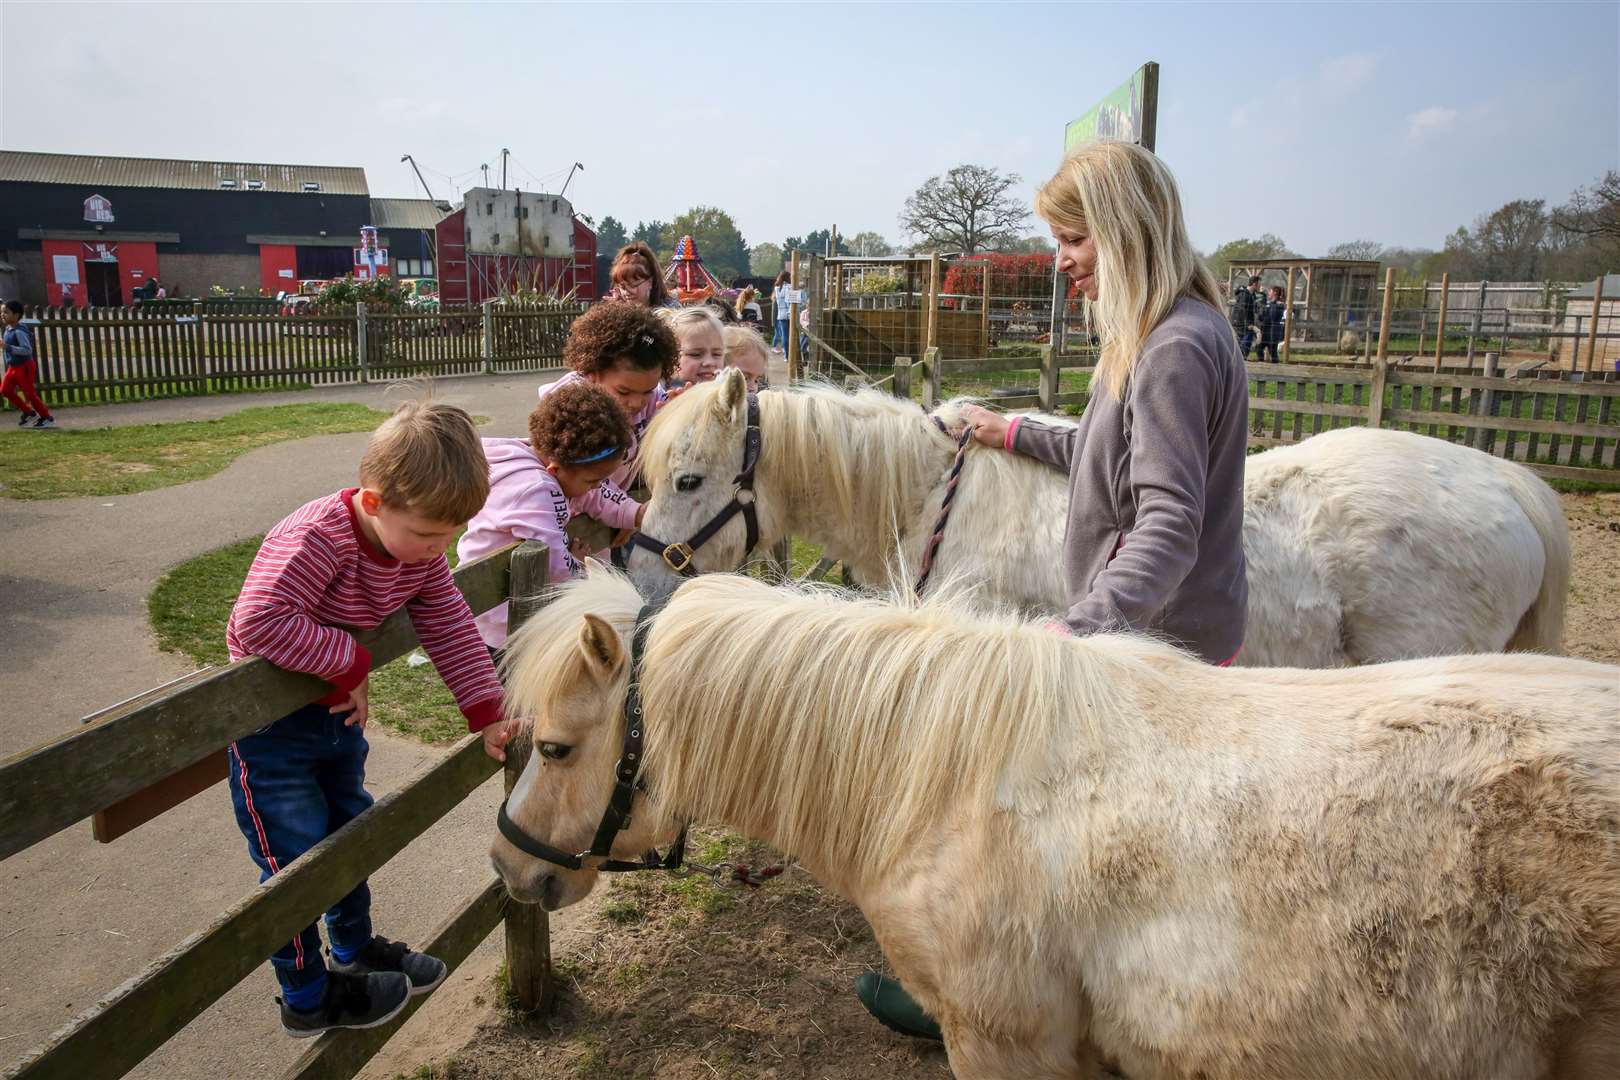 The Hop Farm in Paddock Wood has animals to visit as well